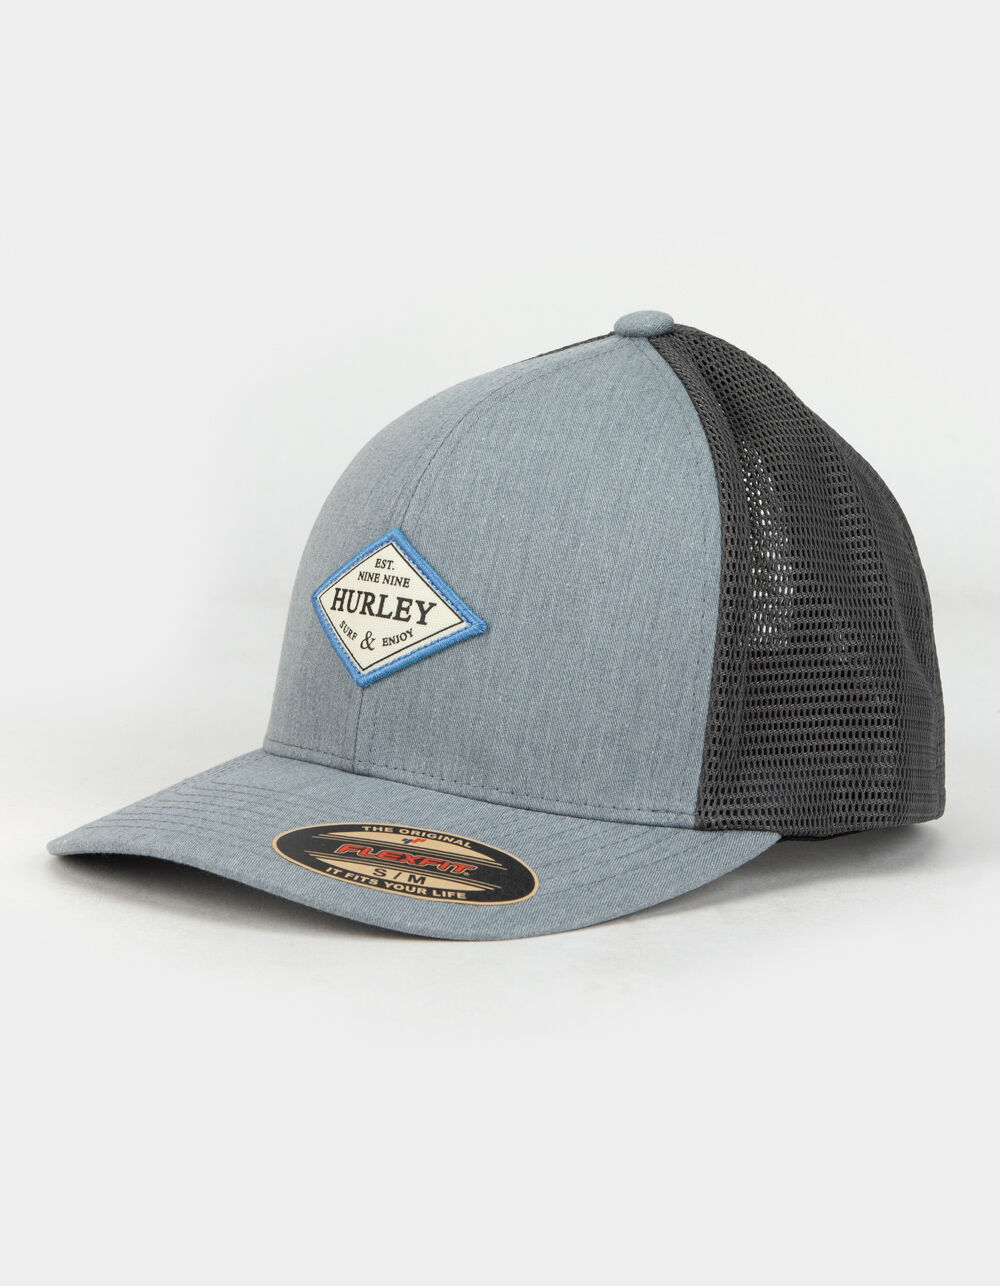 HURLEY Surf And Sea Mens Hat - GRAY | Tillys